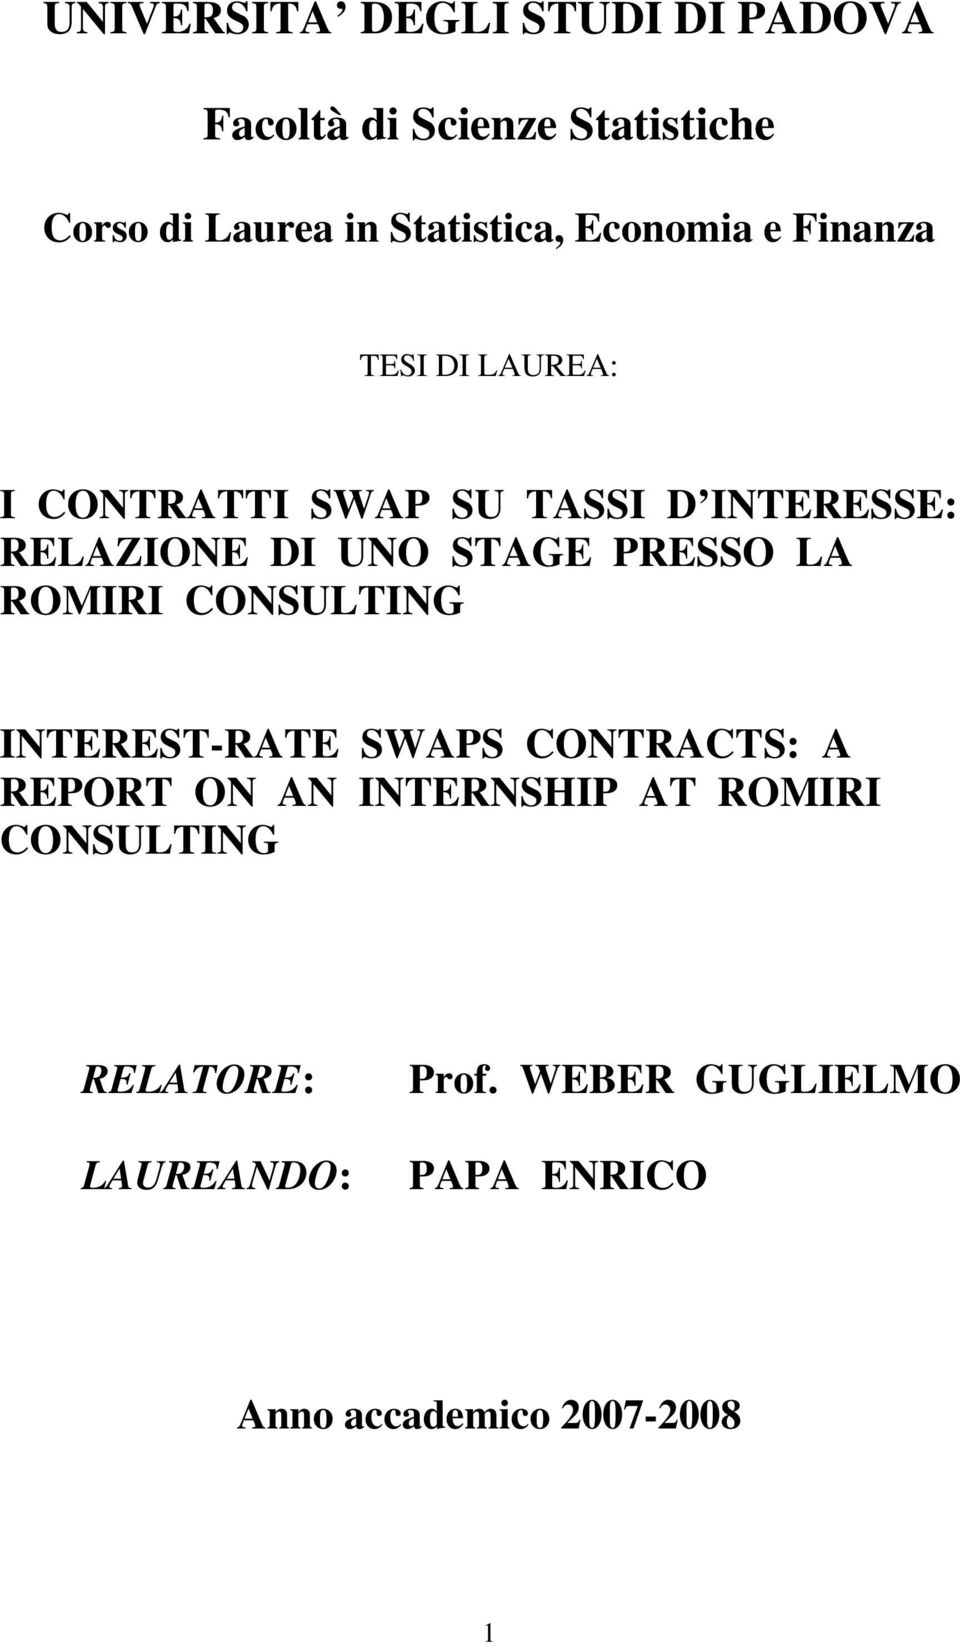 STAGE PRESSO LA ROMIRI CONSULTING INTEREST-RATE SWAPS CONTRACTS: A REPORT ON AN INTERNSHIP AT